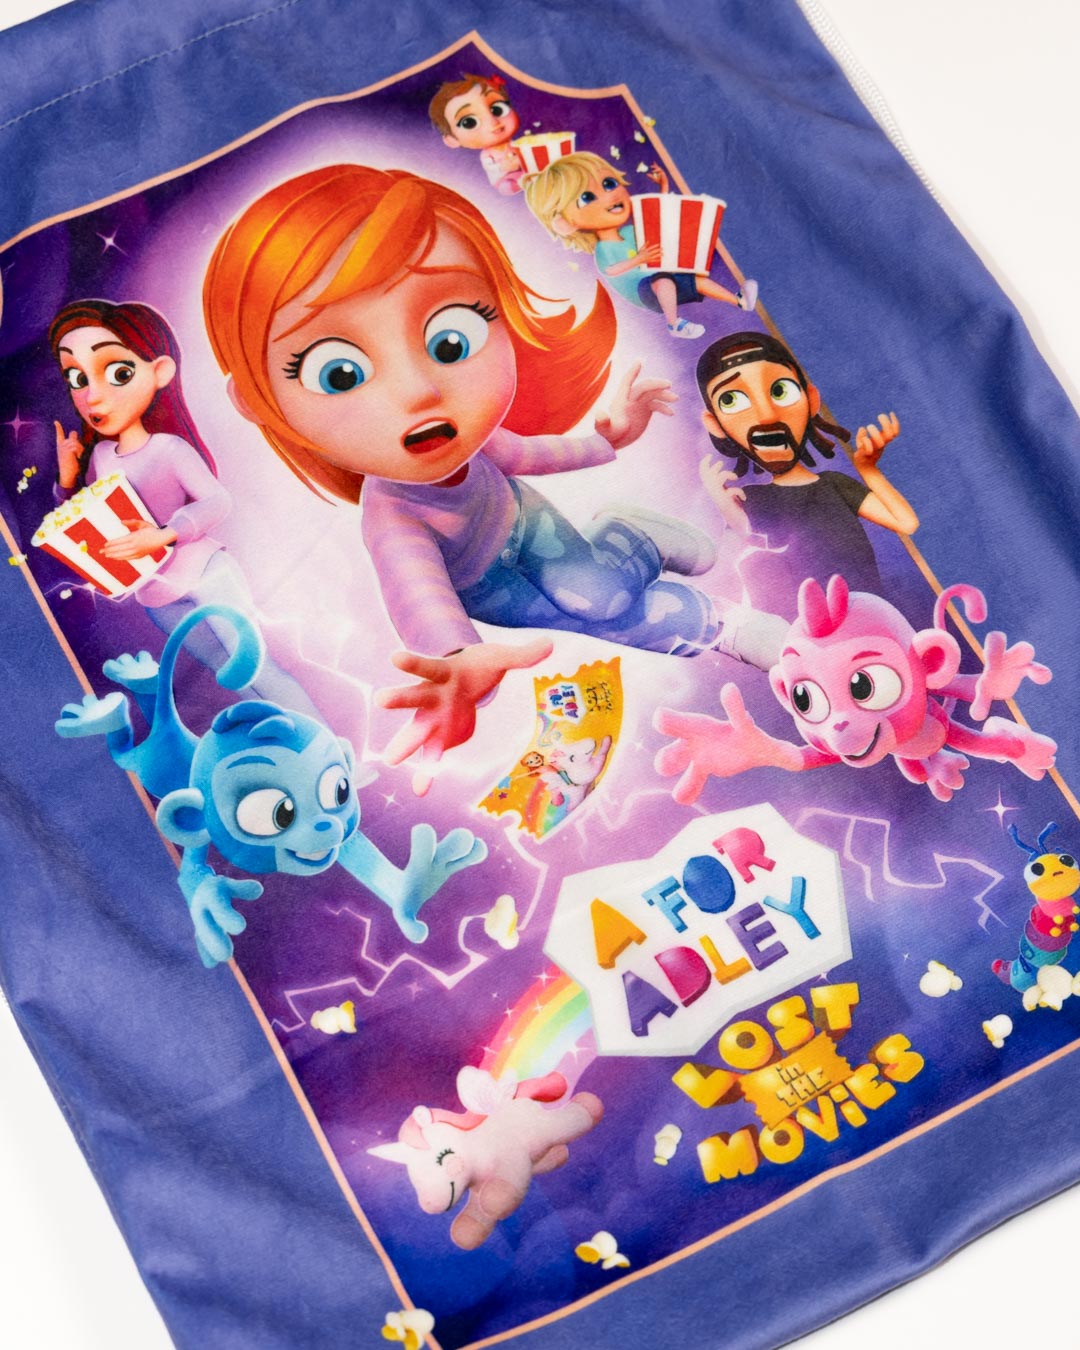 Lost in the Movies Bag (with FUN STUFF!!)